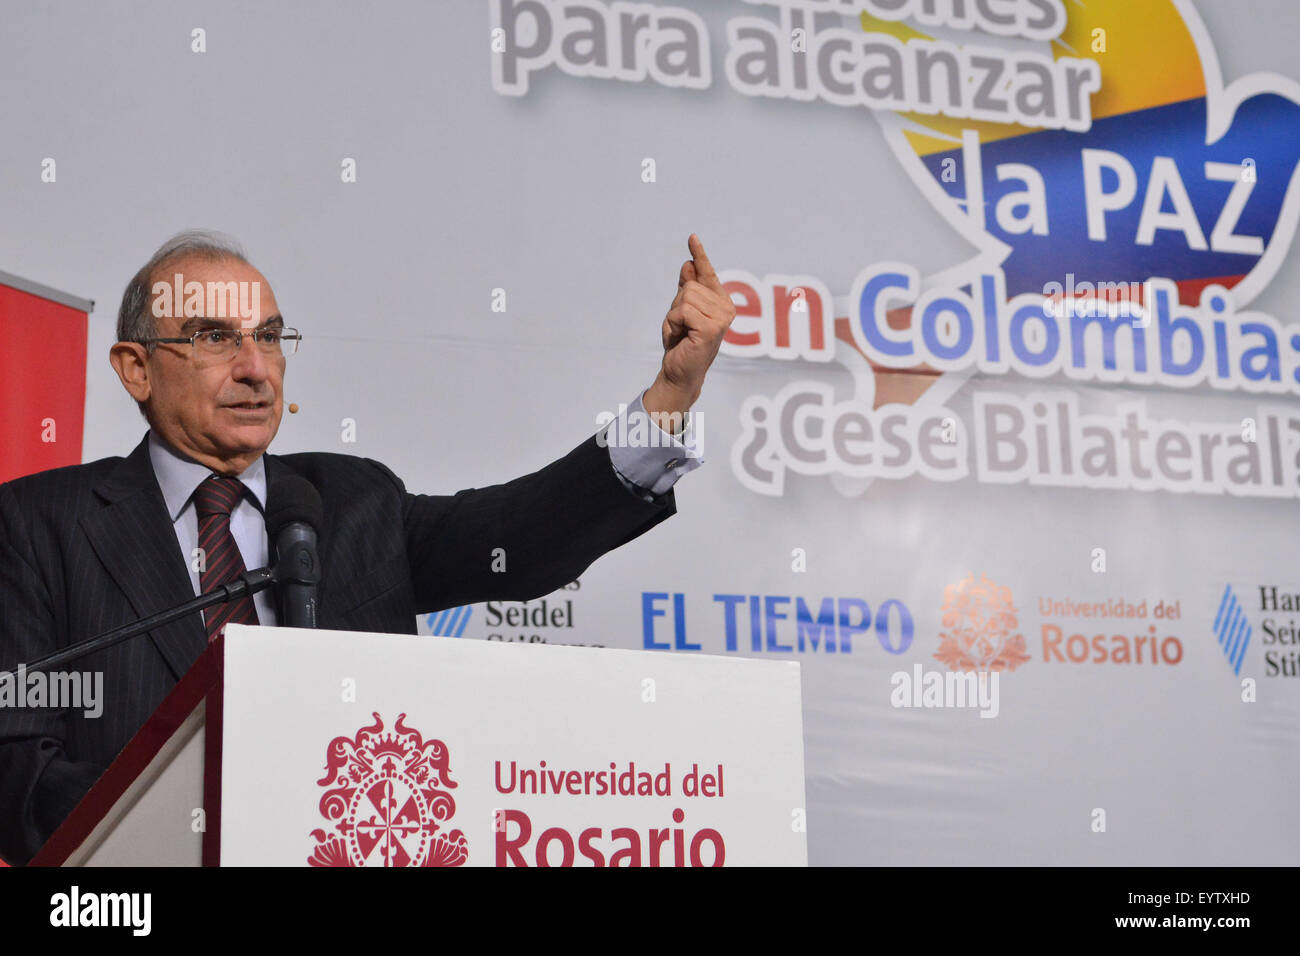 Bogota, Colombia. 3rd Aug, 2015. Humberto de la Calle, chief of the delegation of the Colombian Government in the peace talks with the Armed Revolutionary Forces of Colombia (FARC), delivers a speech during the forum 'Contributions to reach the peace in Colombia: Bilateral cease?', that is held in the Rosario University, in Bogota, Colombia, on Aug. 3, 2015. According to the local press, the Government of Colombia will analyze the application of a bilateral and indefinite cease with the FARC in November. © Garman Enciso/COLPRENSA/Xinhua/Alamy Live News Stock Photo